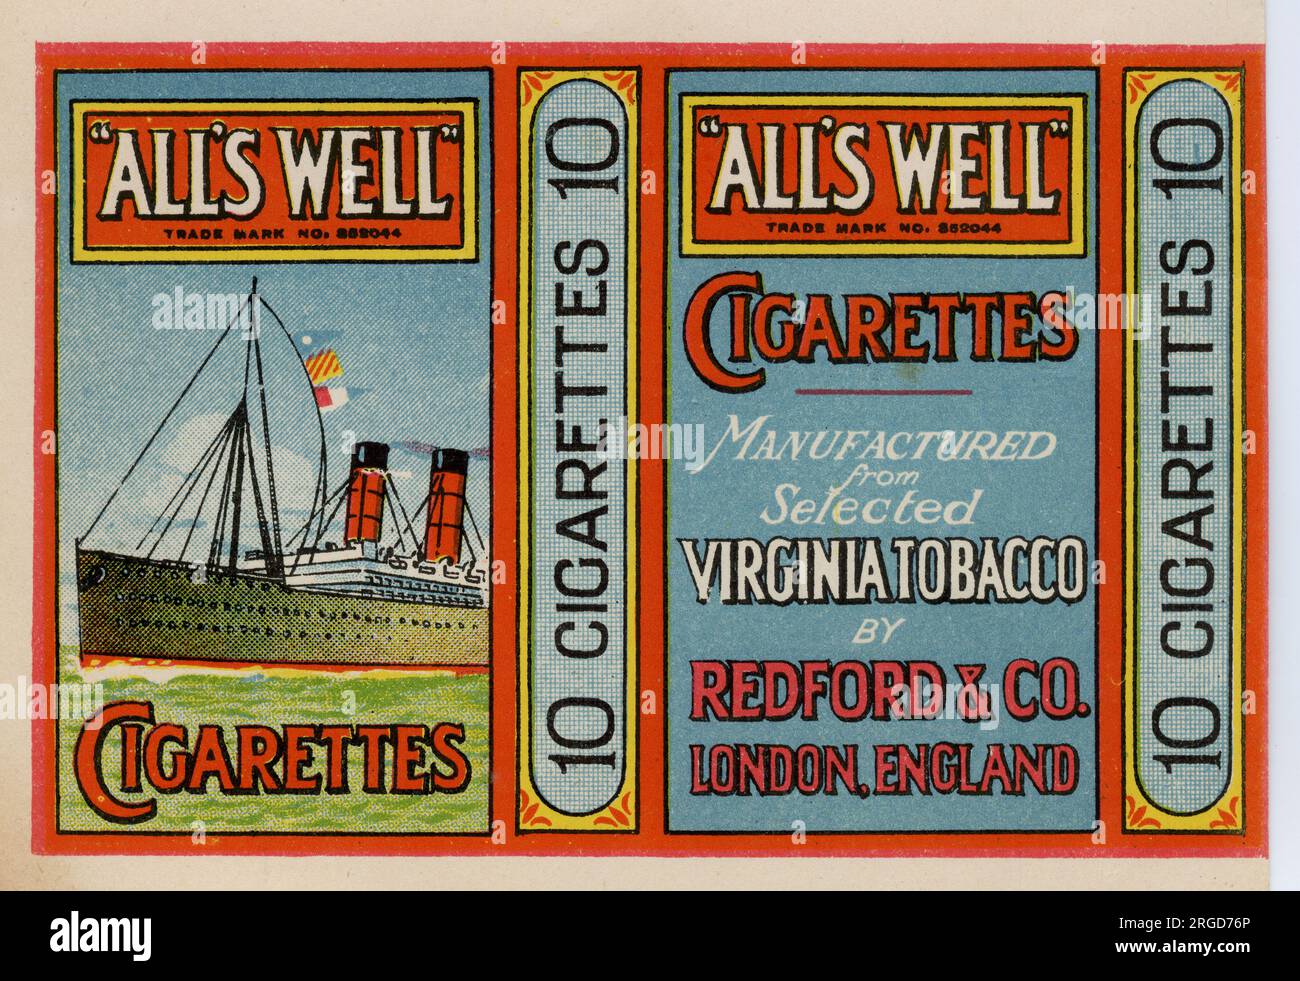 All's Well Cigarettes by Redford and Co, London, packet design Stock Photo